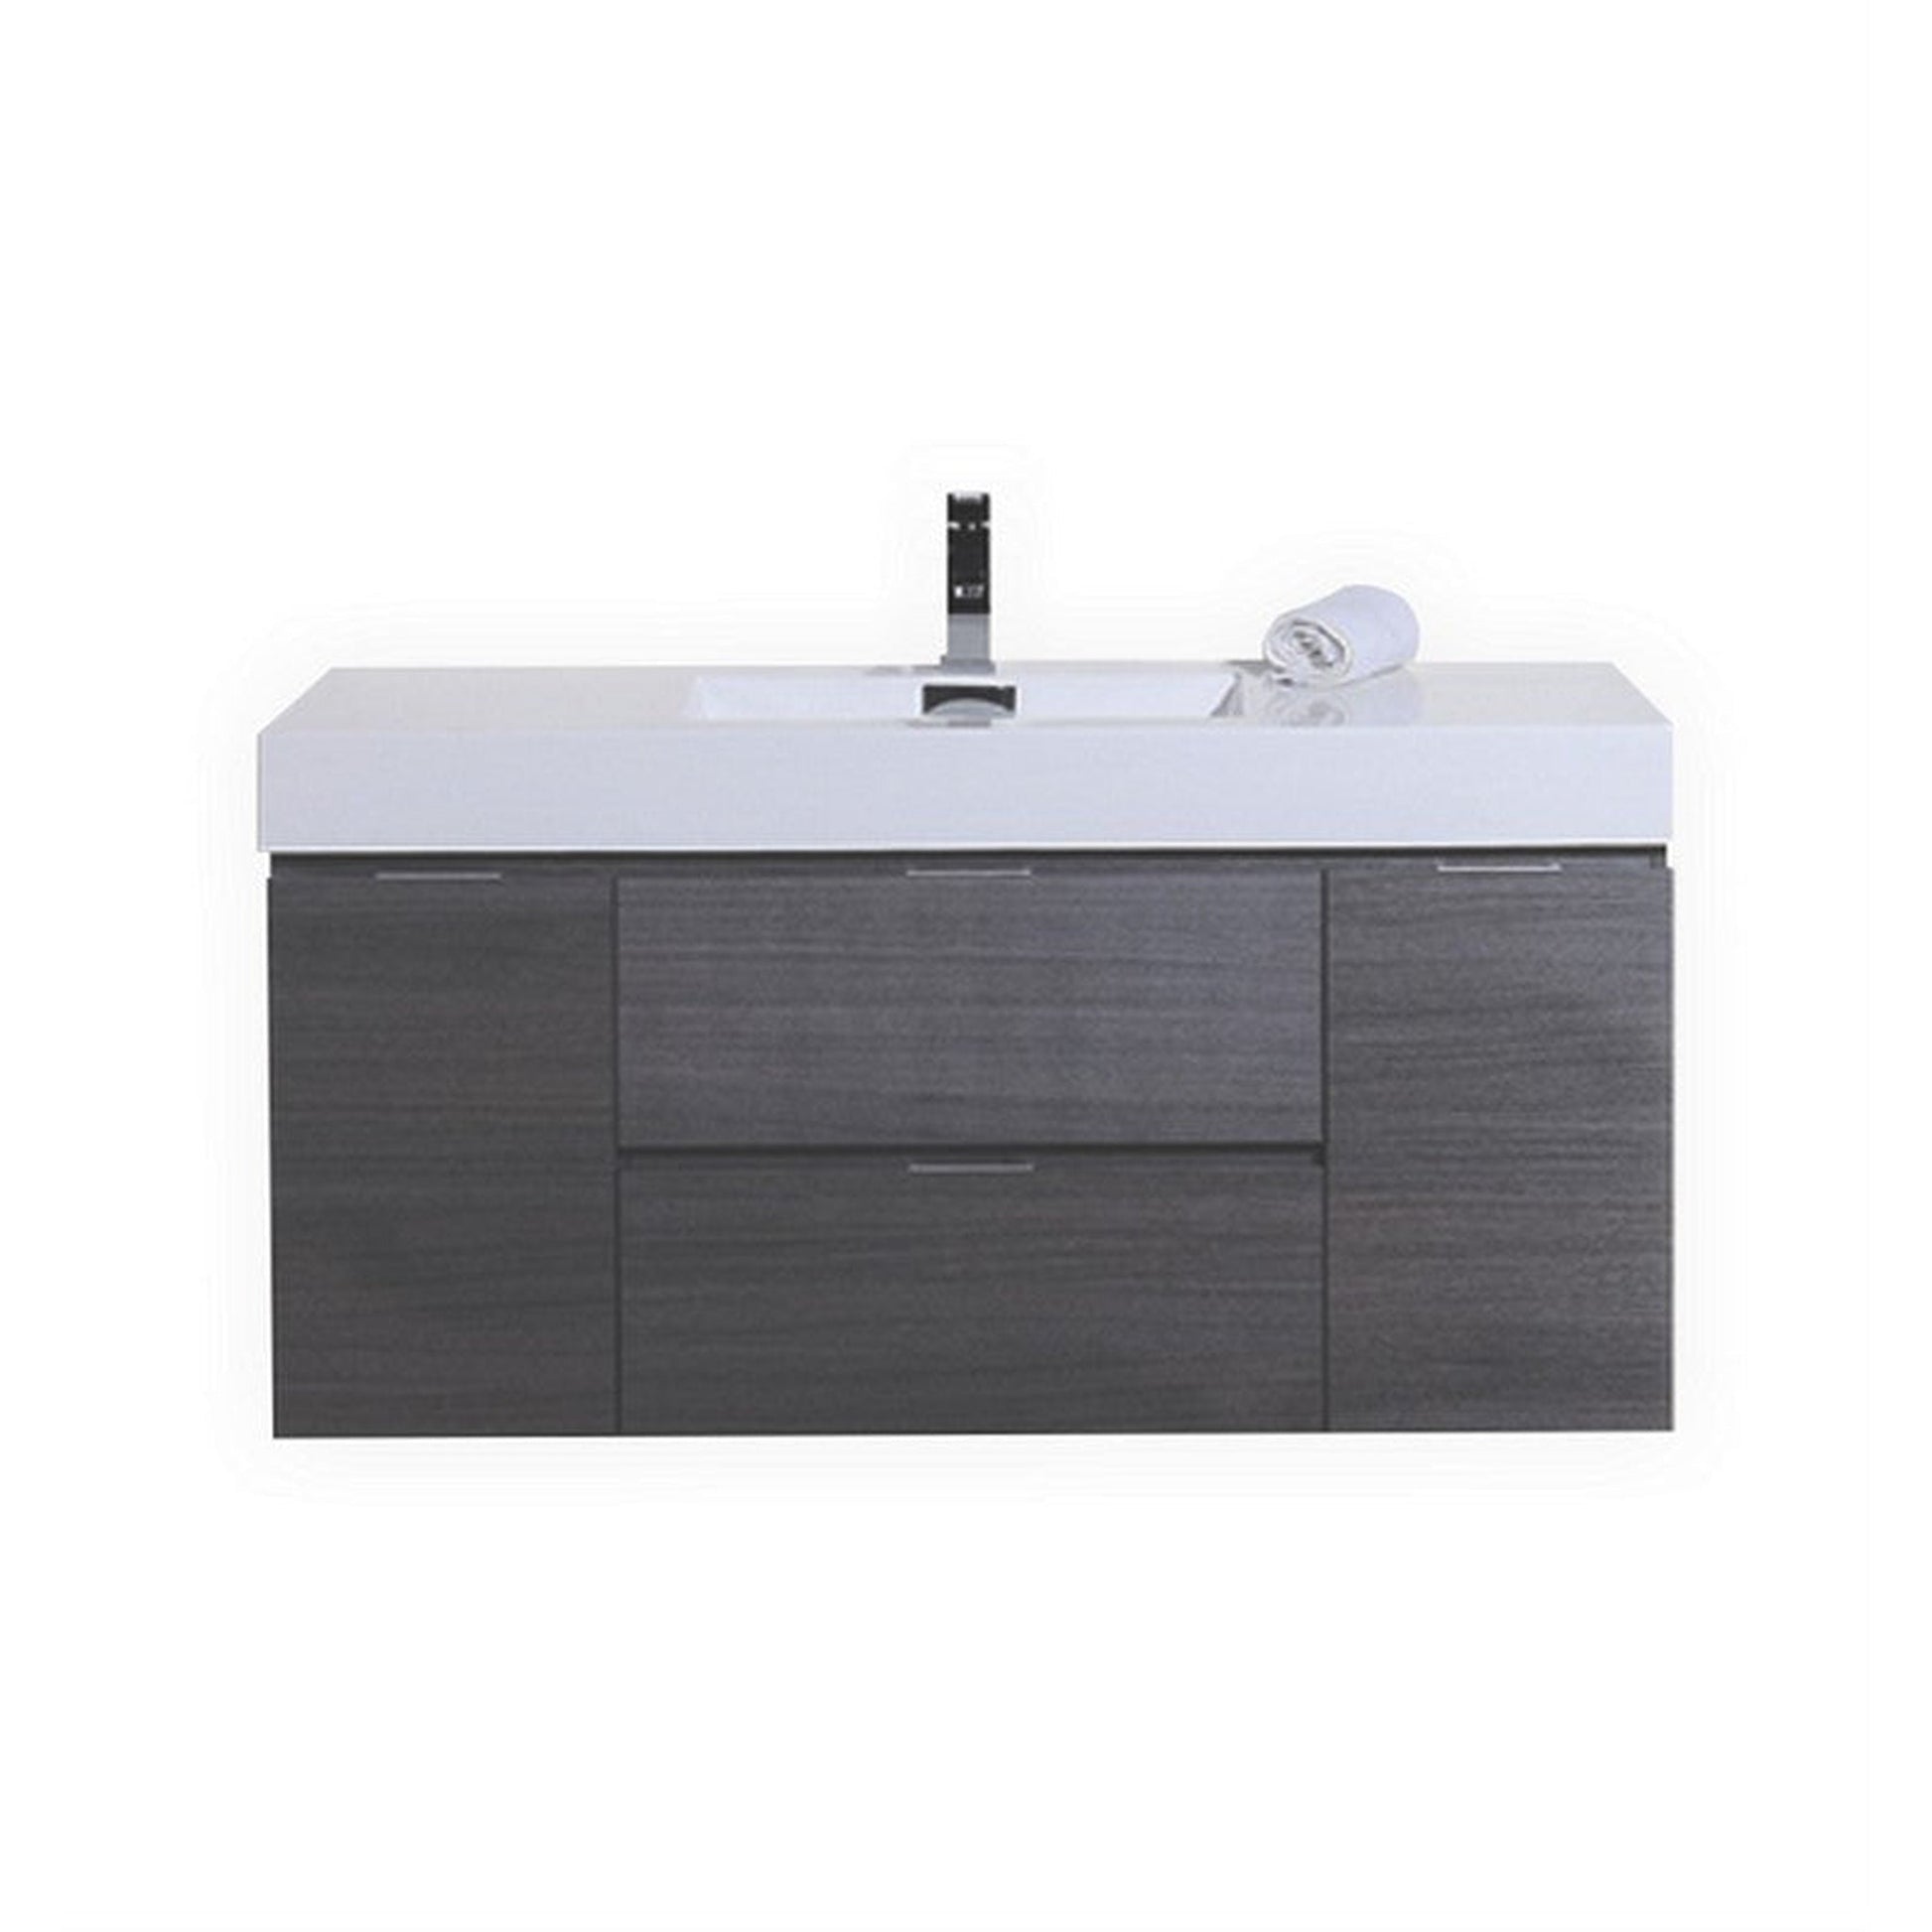 KubeBath Bliss 48" Gray Oak Wall-Mounted Modern Bathroom Vanity With Single Integrated Acrylic Sink With Overflow and 44" Gray Oak Framed Mirror With Shelf